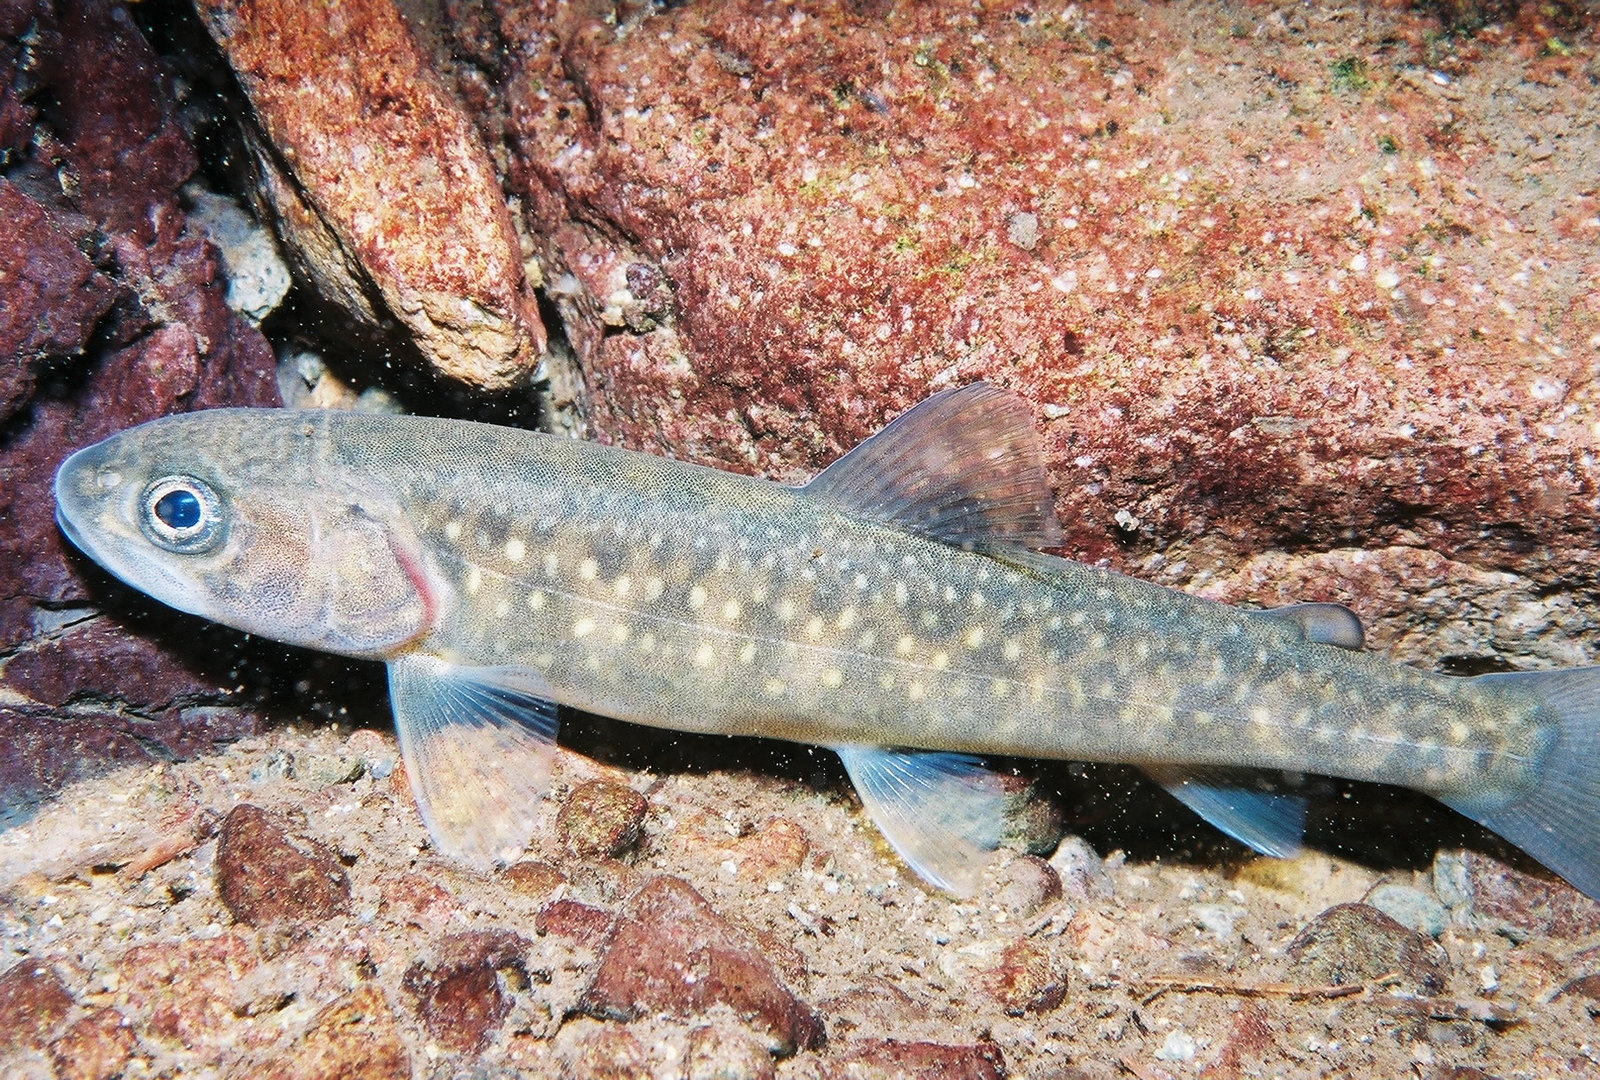 Juvenile bull trout in the water